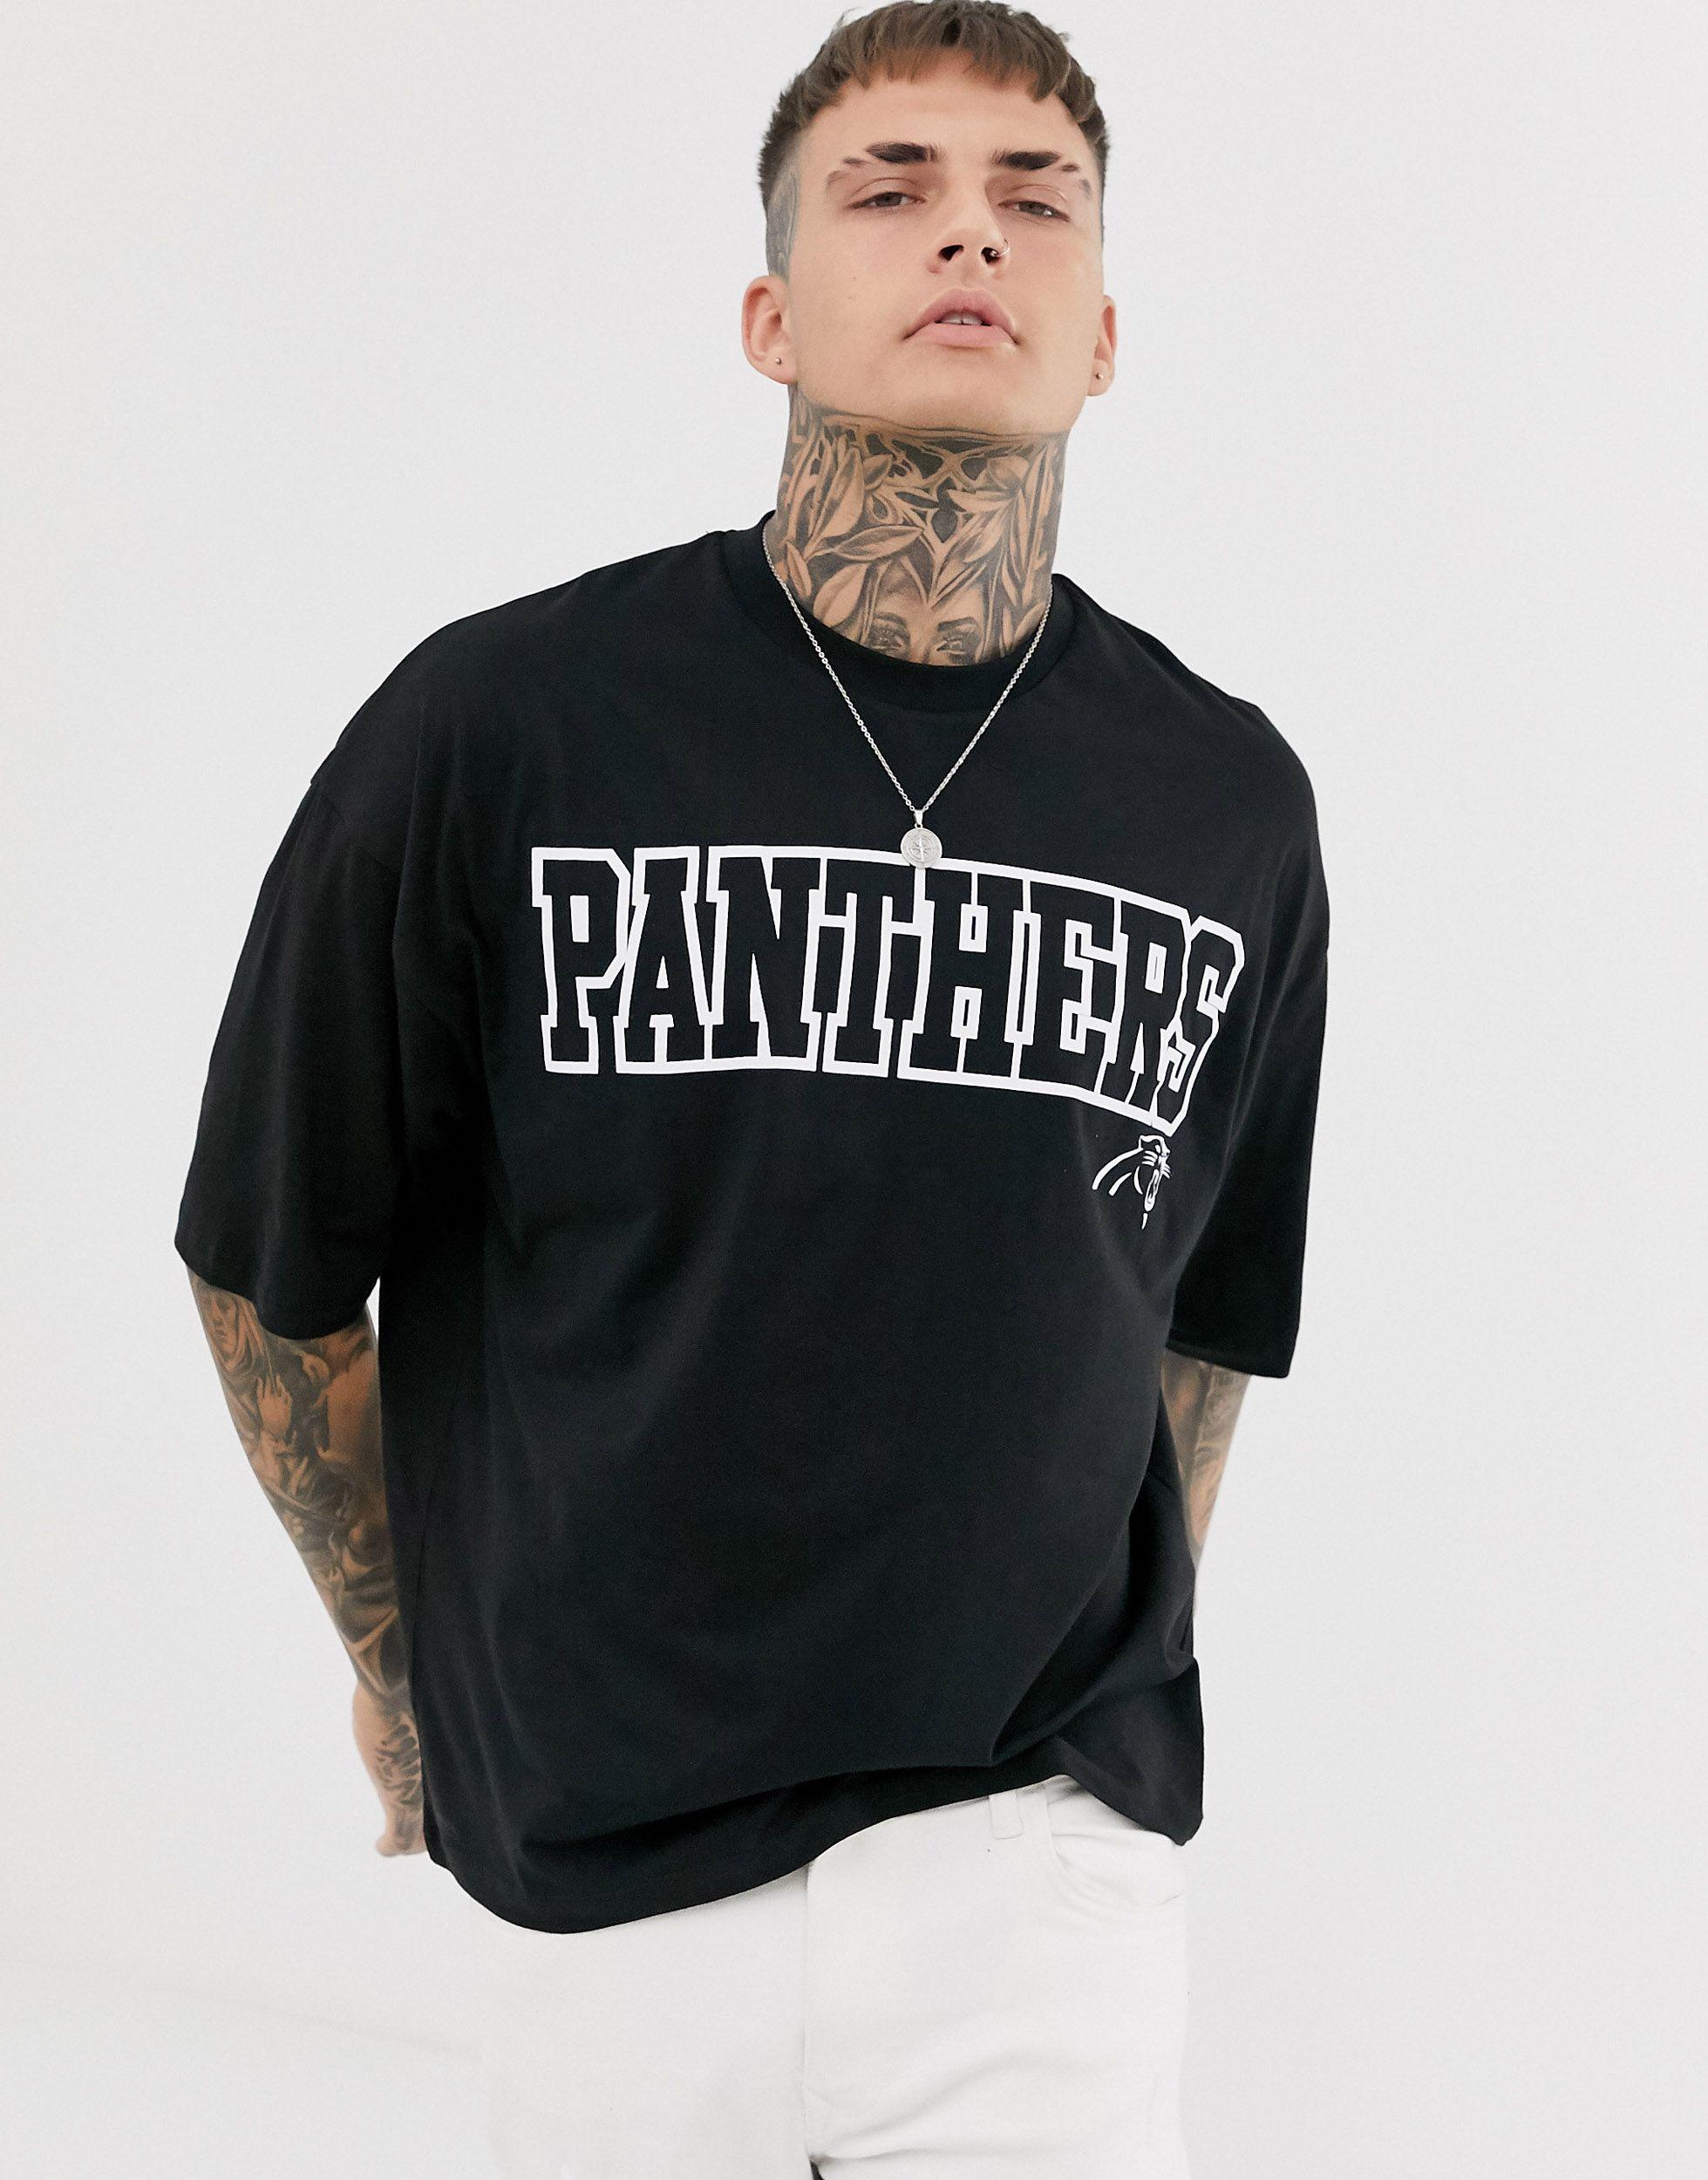 ASOS DESIGN NFL oversized t-shirt with baseball style v neck and front and  back print